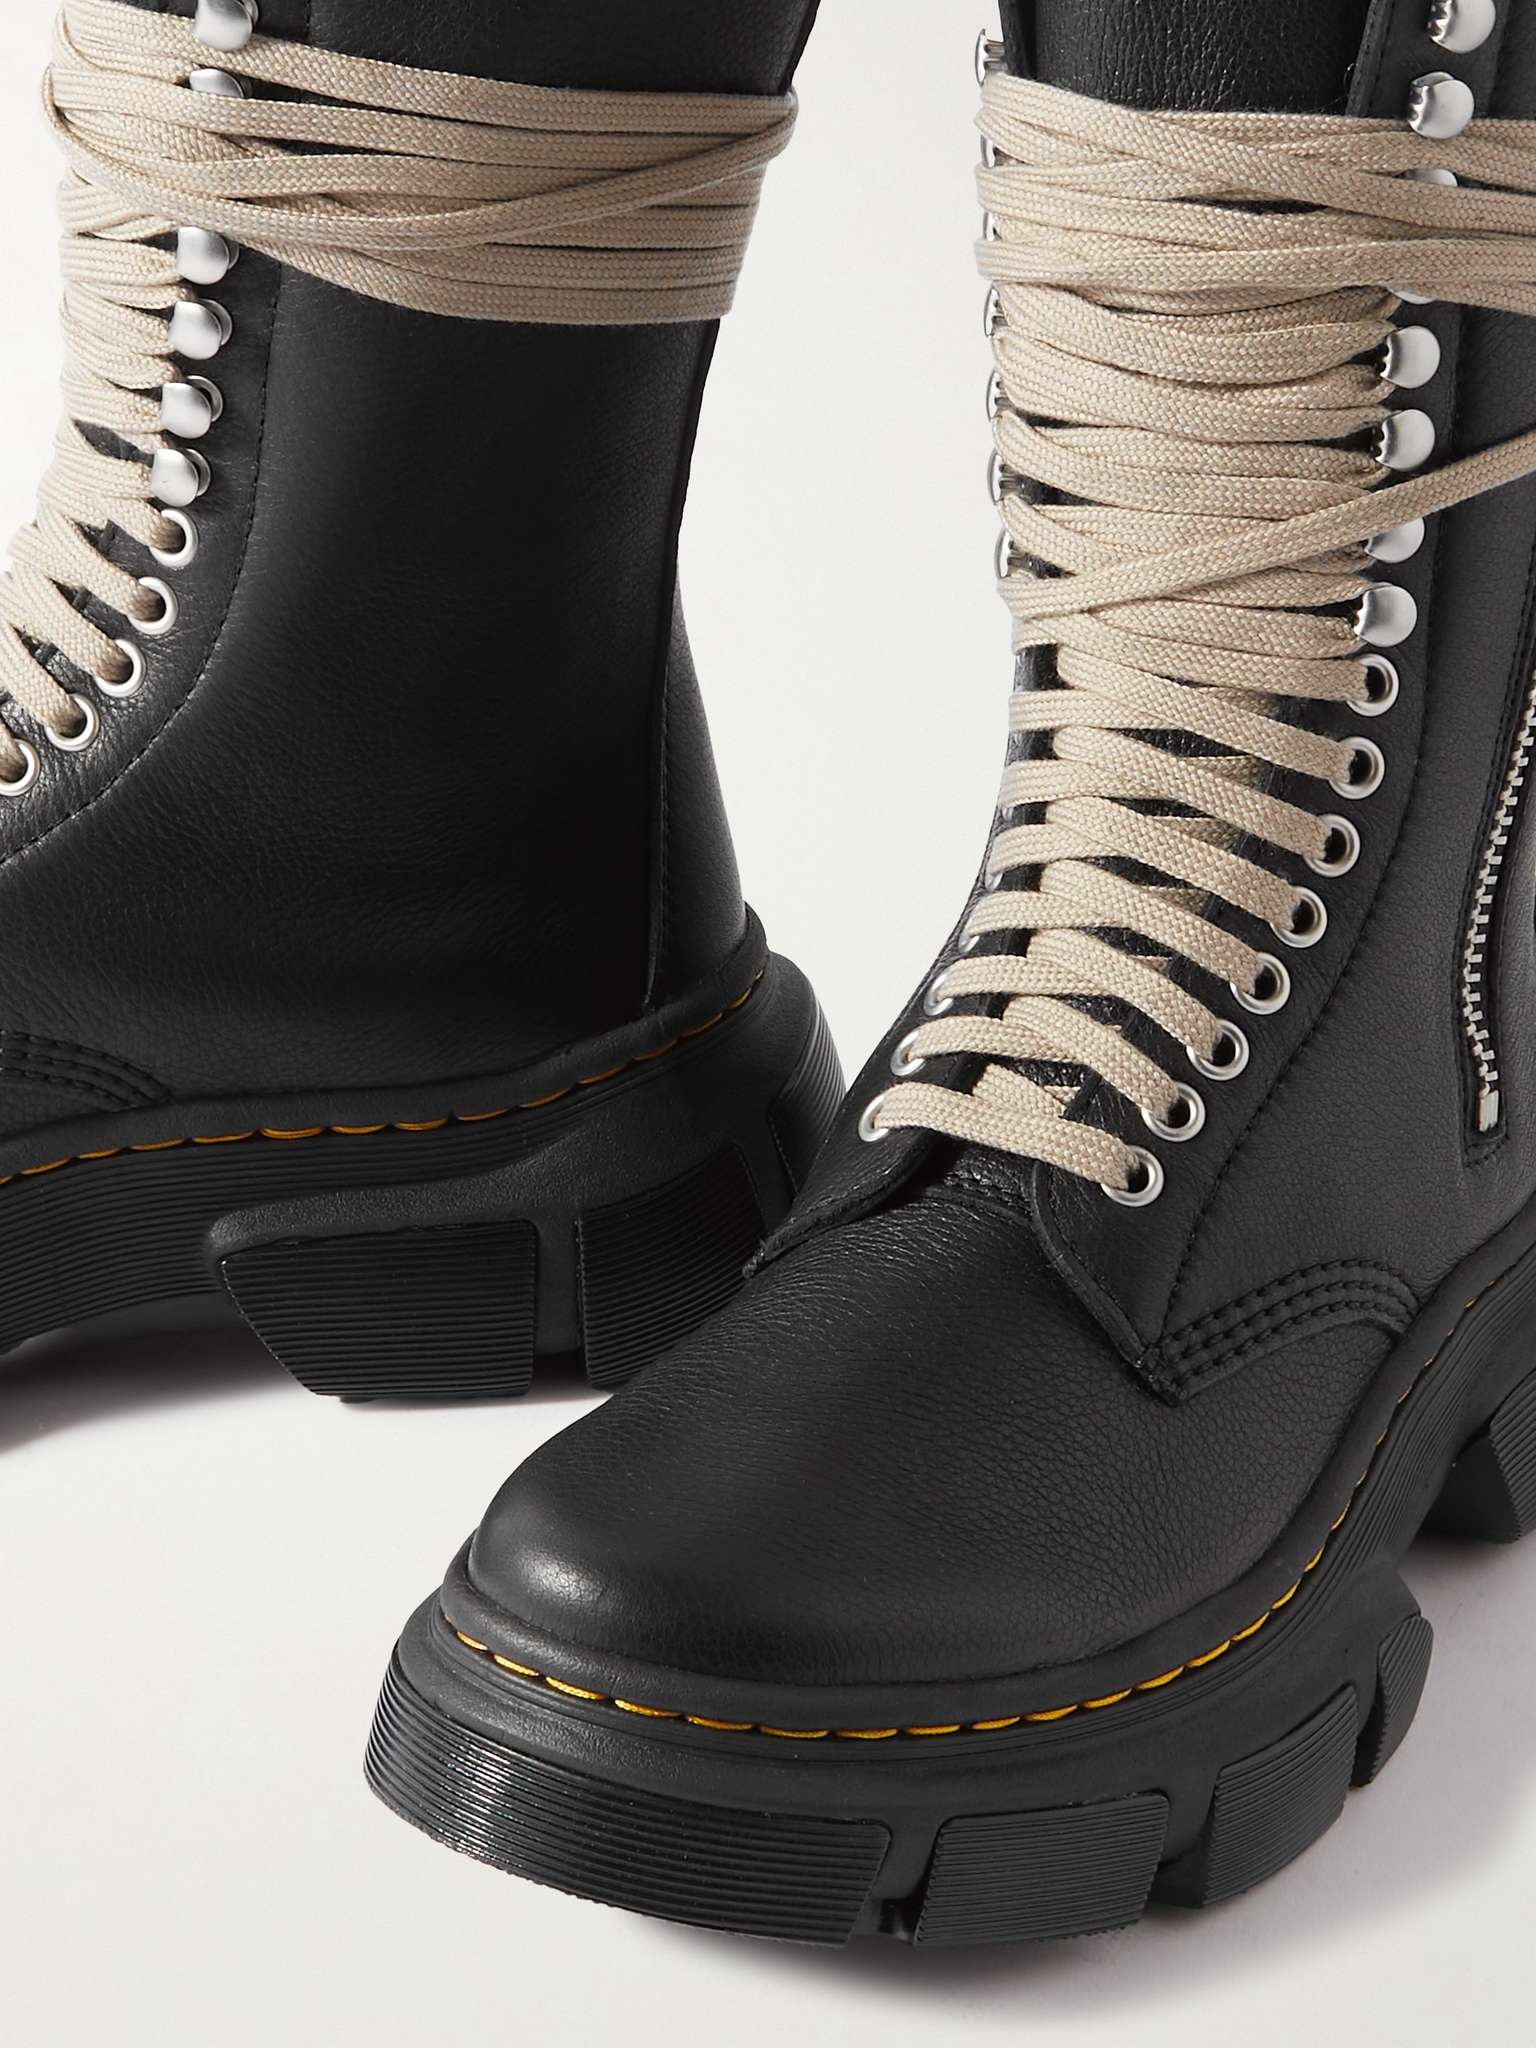 + Dr. Martens 1918 Full-Grain Leather Boots - 6